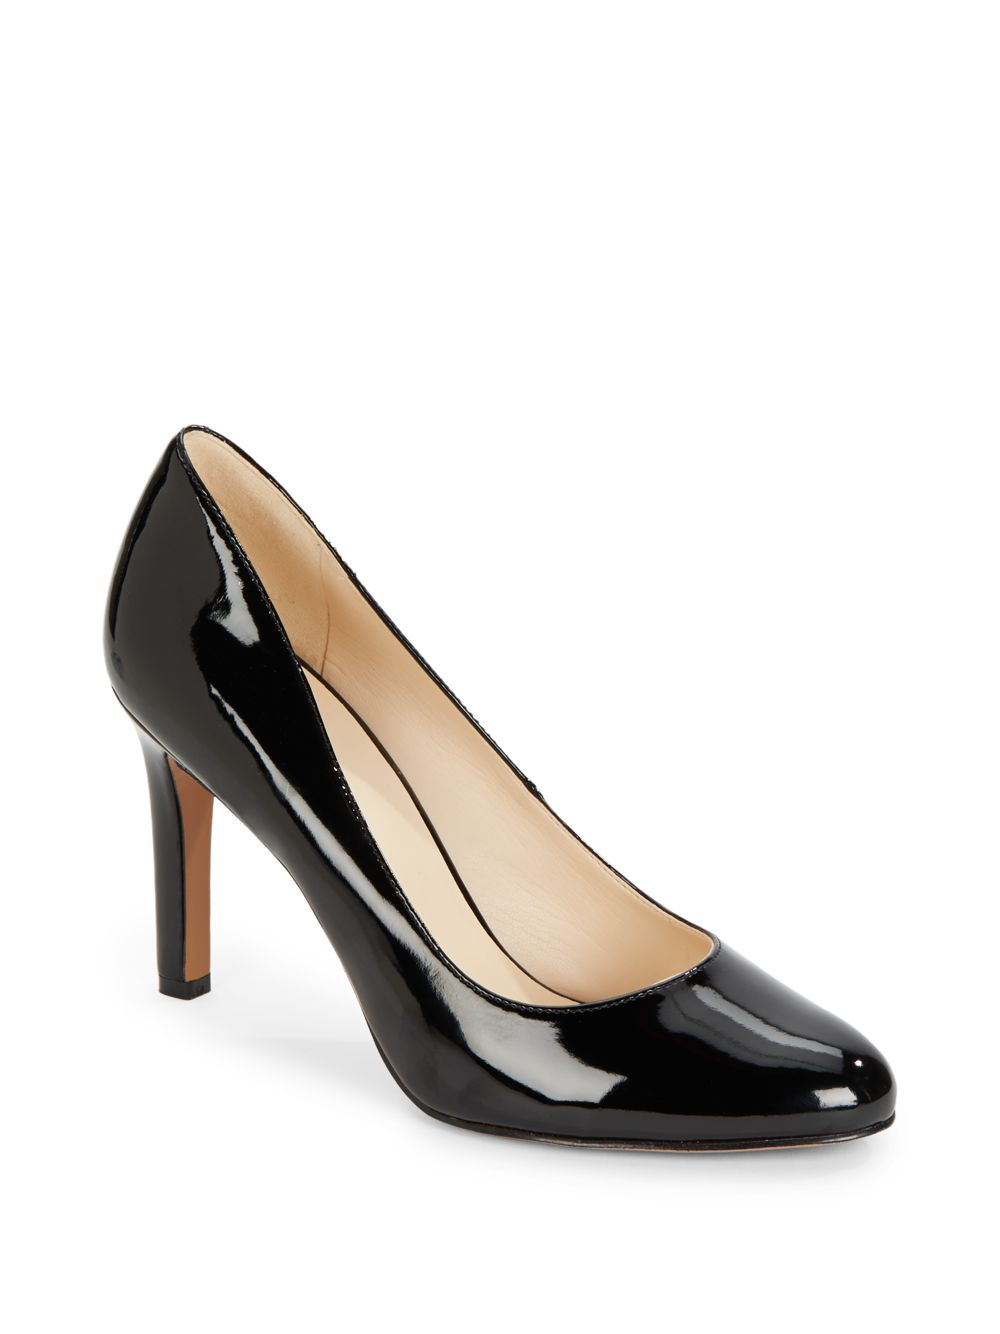 Nine west Gramercy Patent Leather Pumps in Black | Lyst